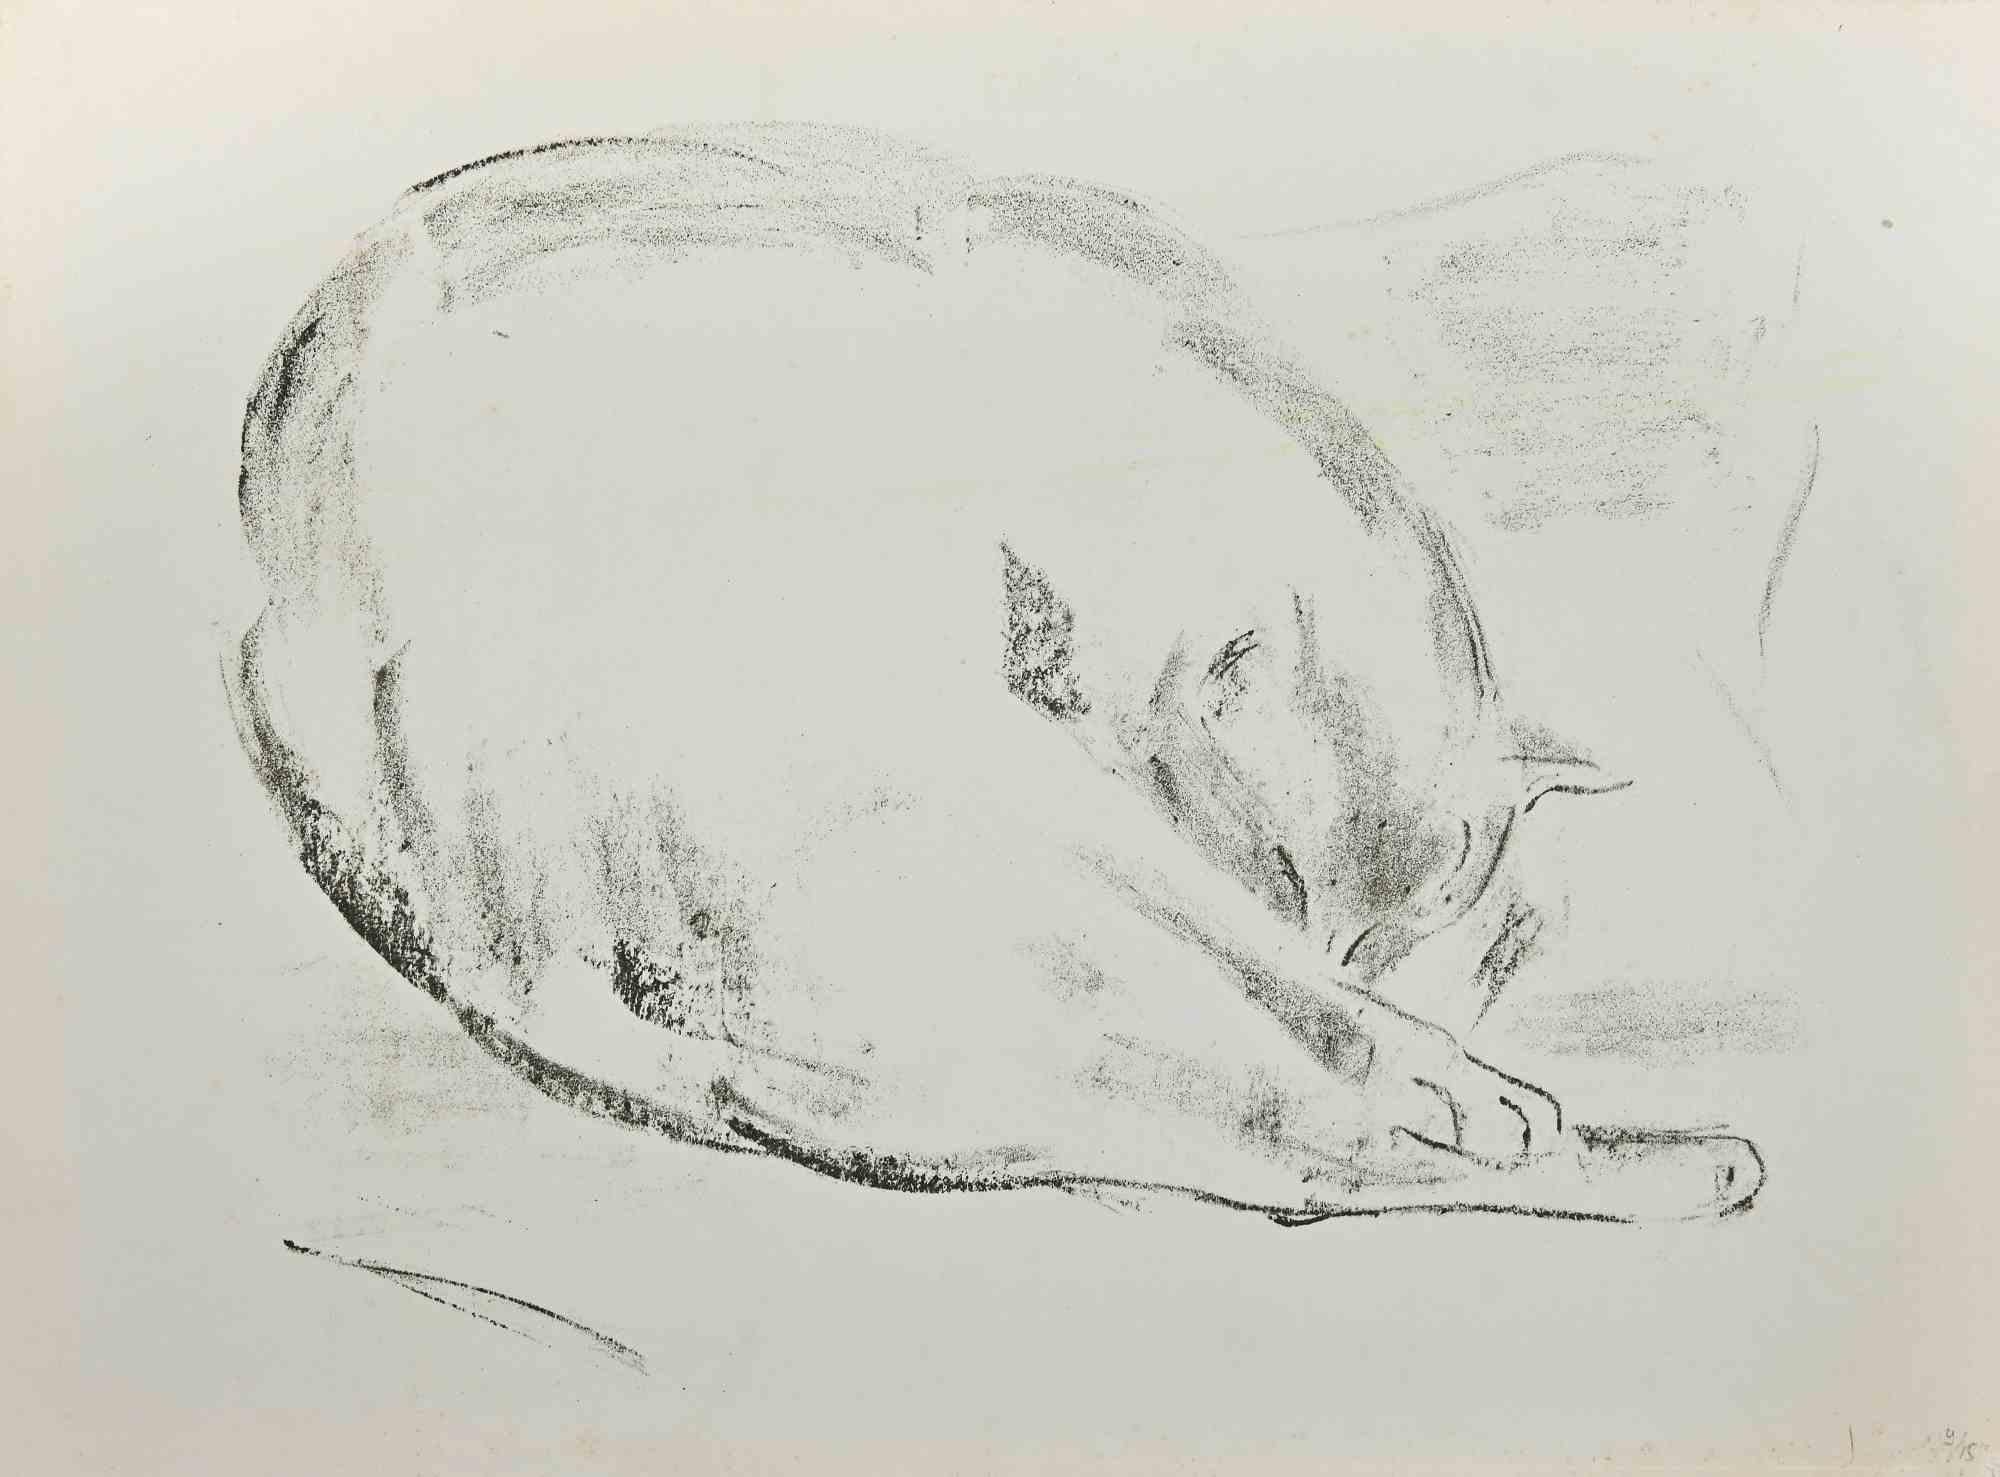 Cat - Original Lithograph by Giselle Halff - Mid-20th Century